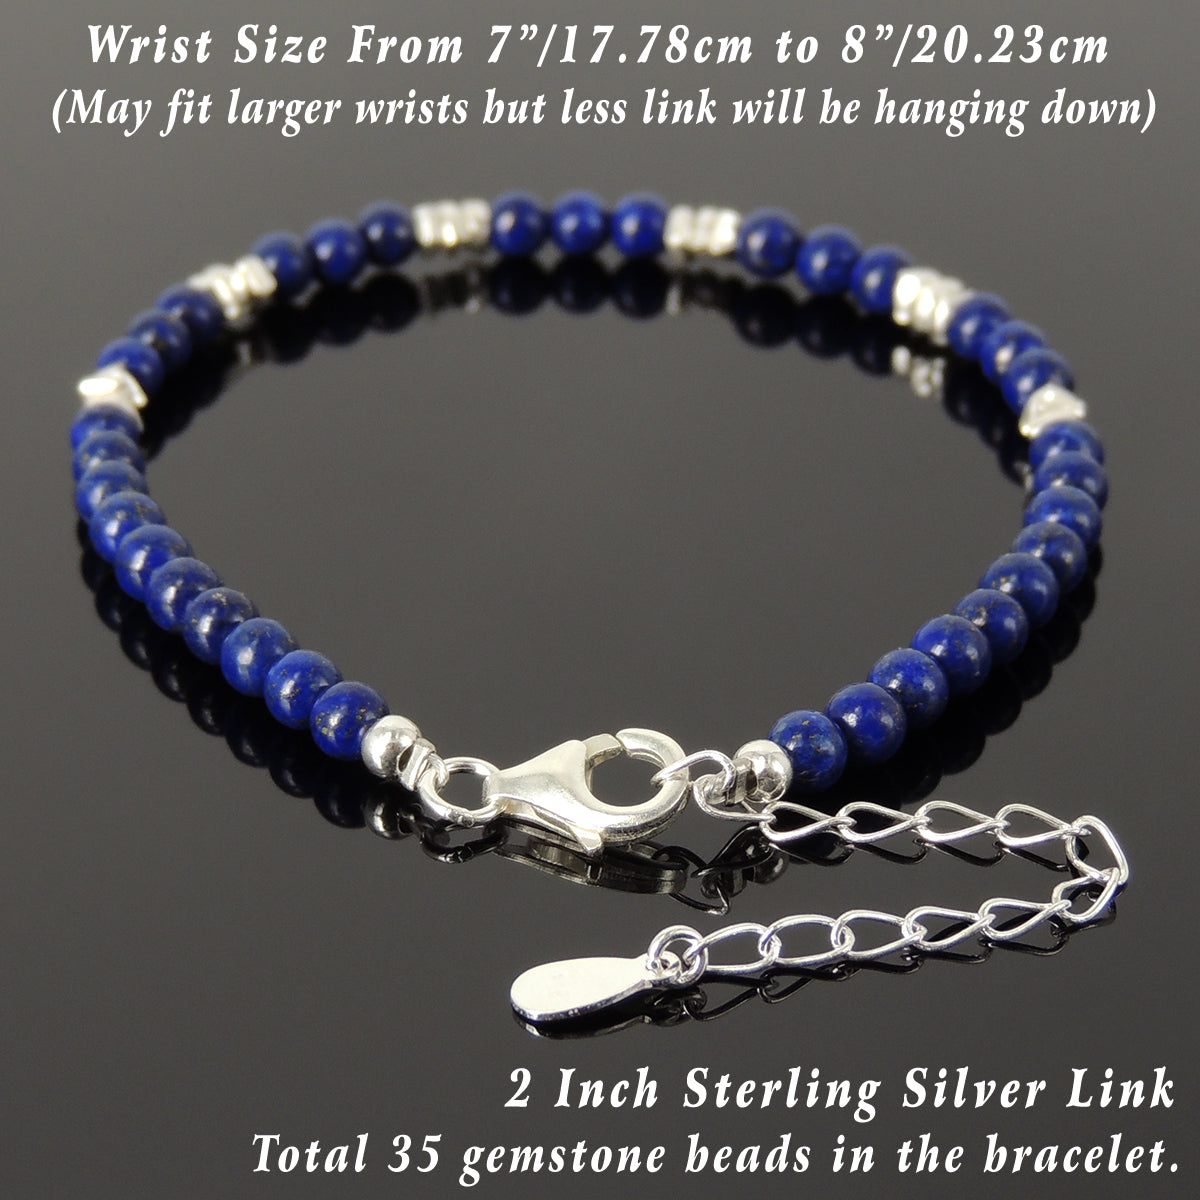 4mm Lapis Lazuli Healing Gemstone Bracelet with S925 Sterling Silver Nugget Beads, Chain, & Clasp - Handmade by Gem & Silver BR1268